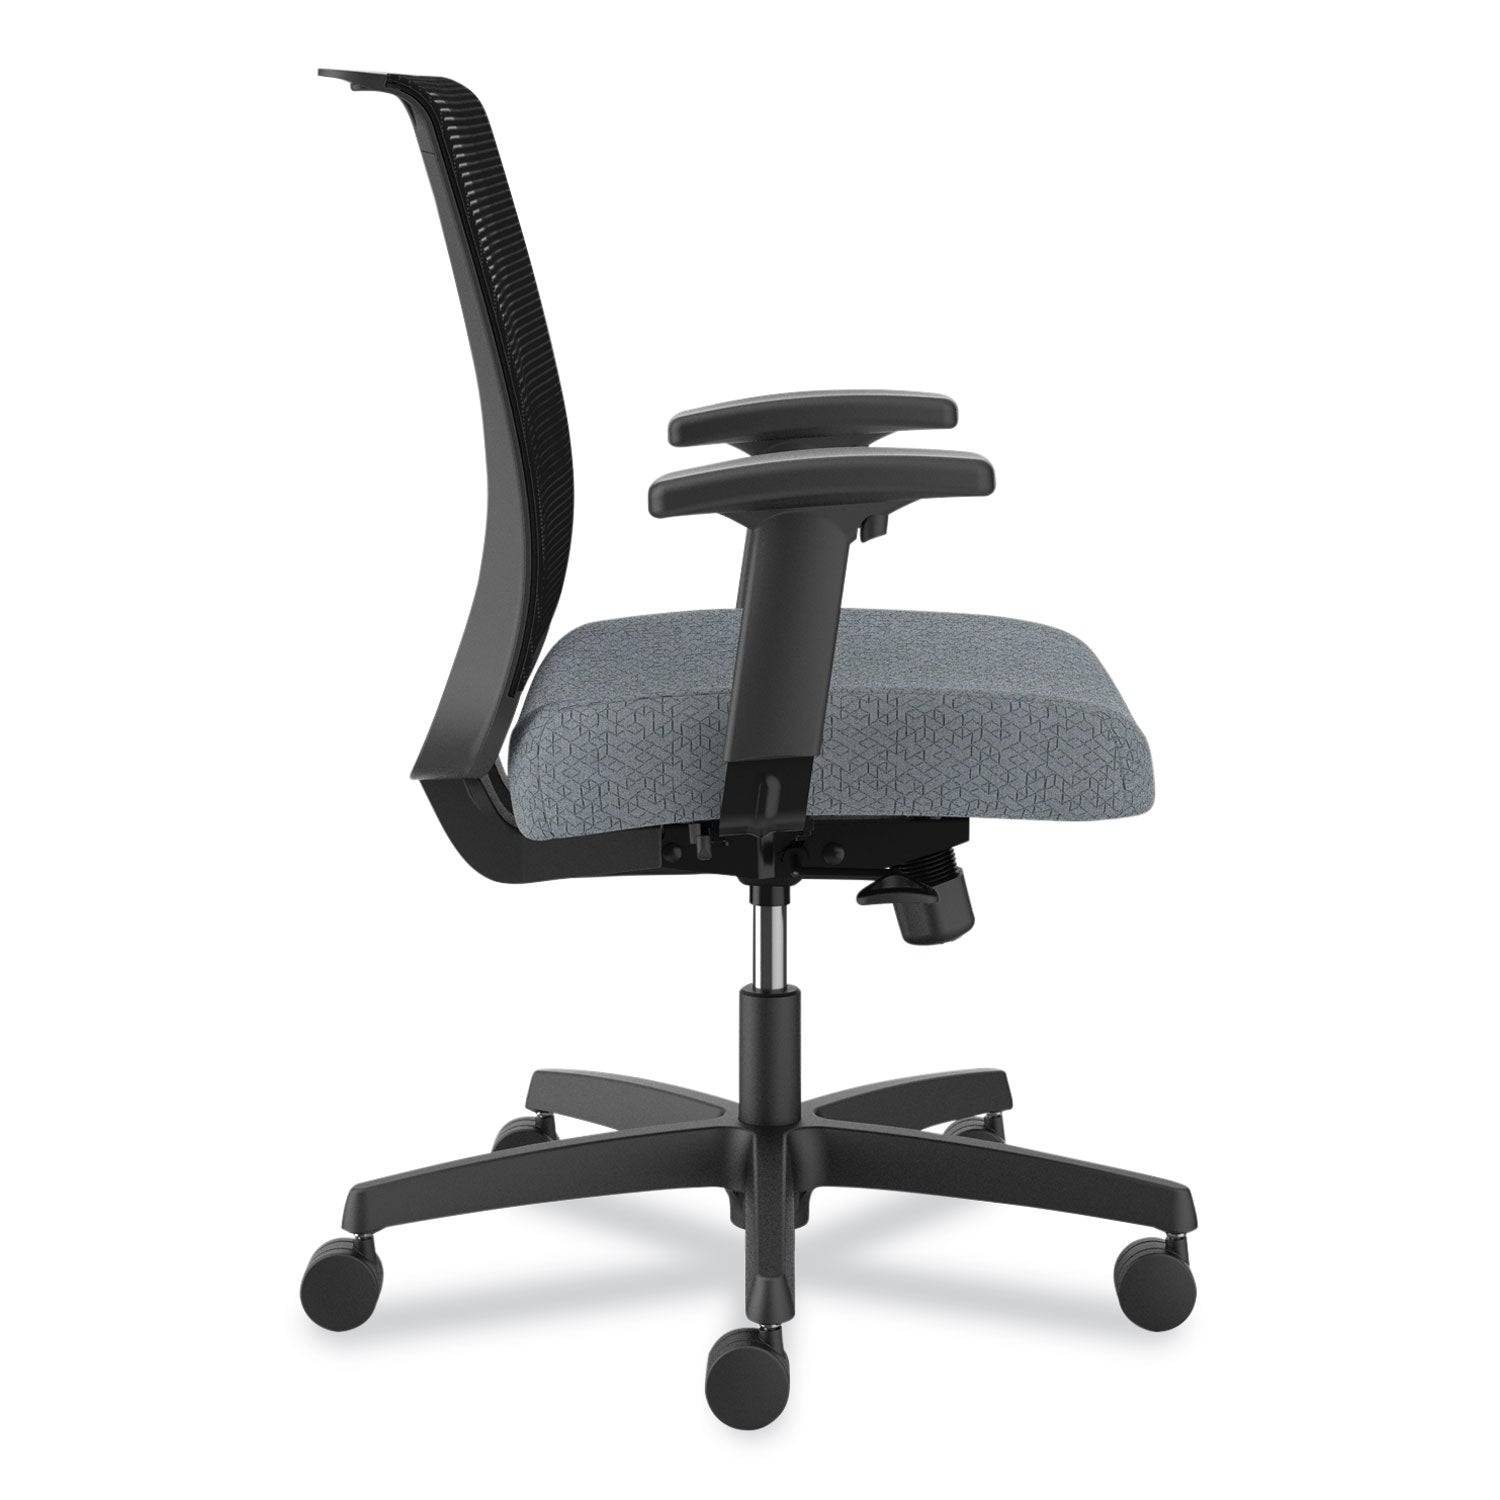 convergence-mid-back-task-chair-up-to-275-lb-165-to-21-seat-ht-basalt-seat-black-back-frame-ships-in-7-10-bus-days_honcmy1aapx25 - 3